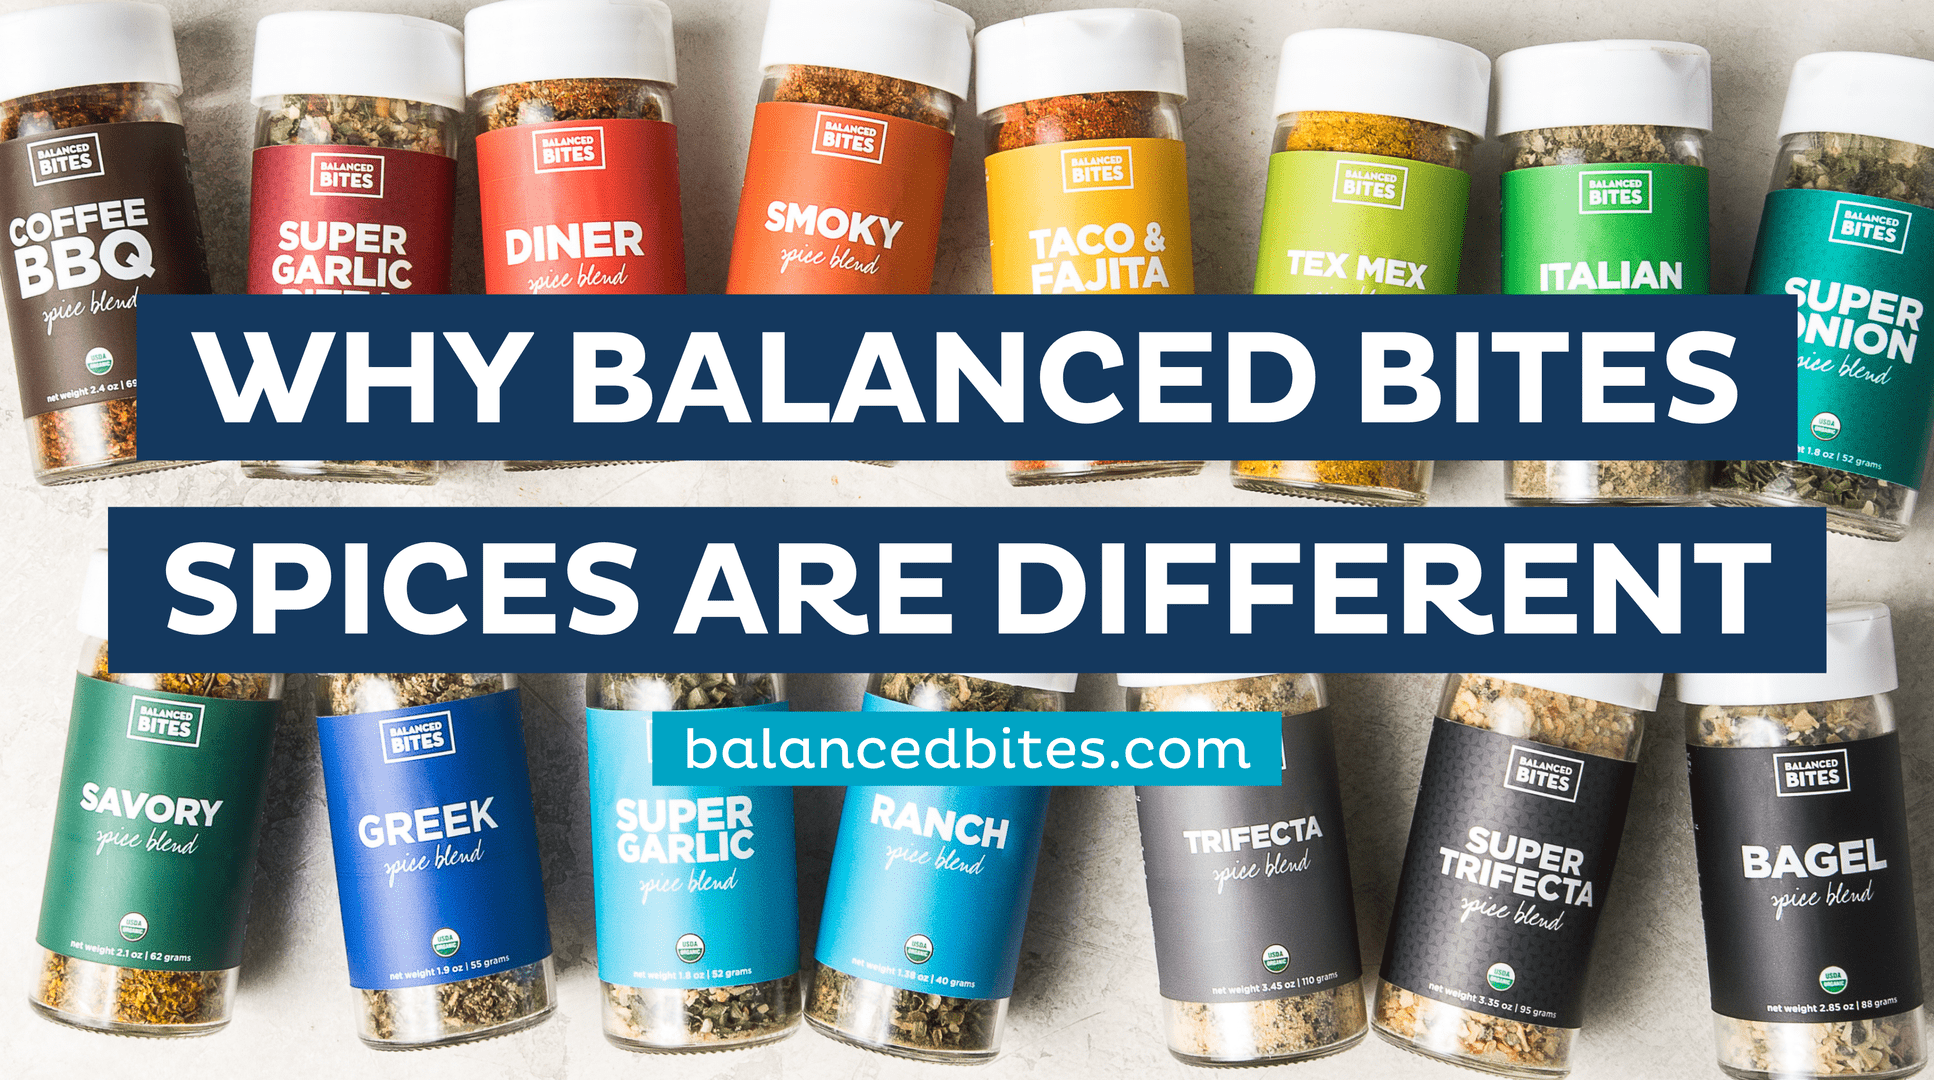 Featured image for “Why Balanced Bites Organic Spices are Different”